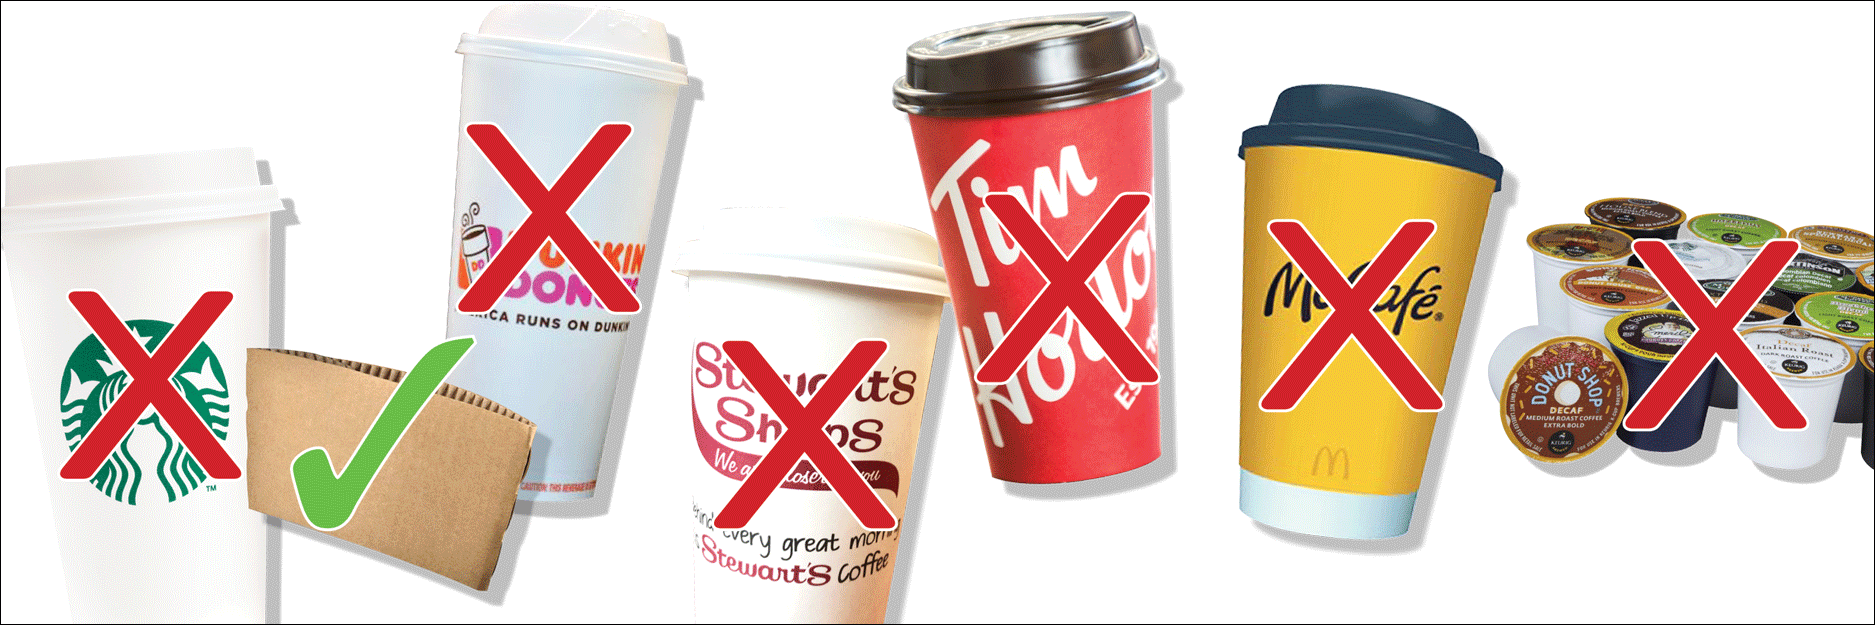 REUSABLE COFFEE CUPS ARE STILL NOT ACCEPTED IN MANY COFFEE CHAINS 